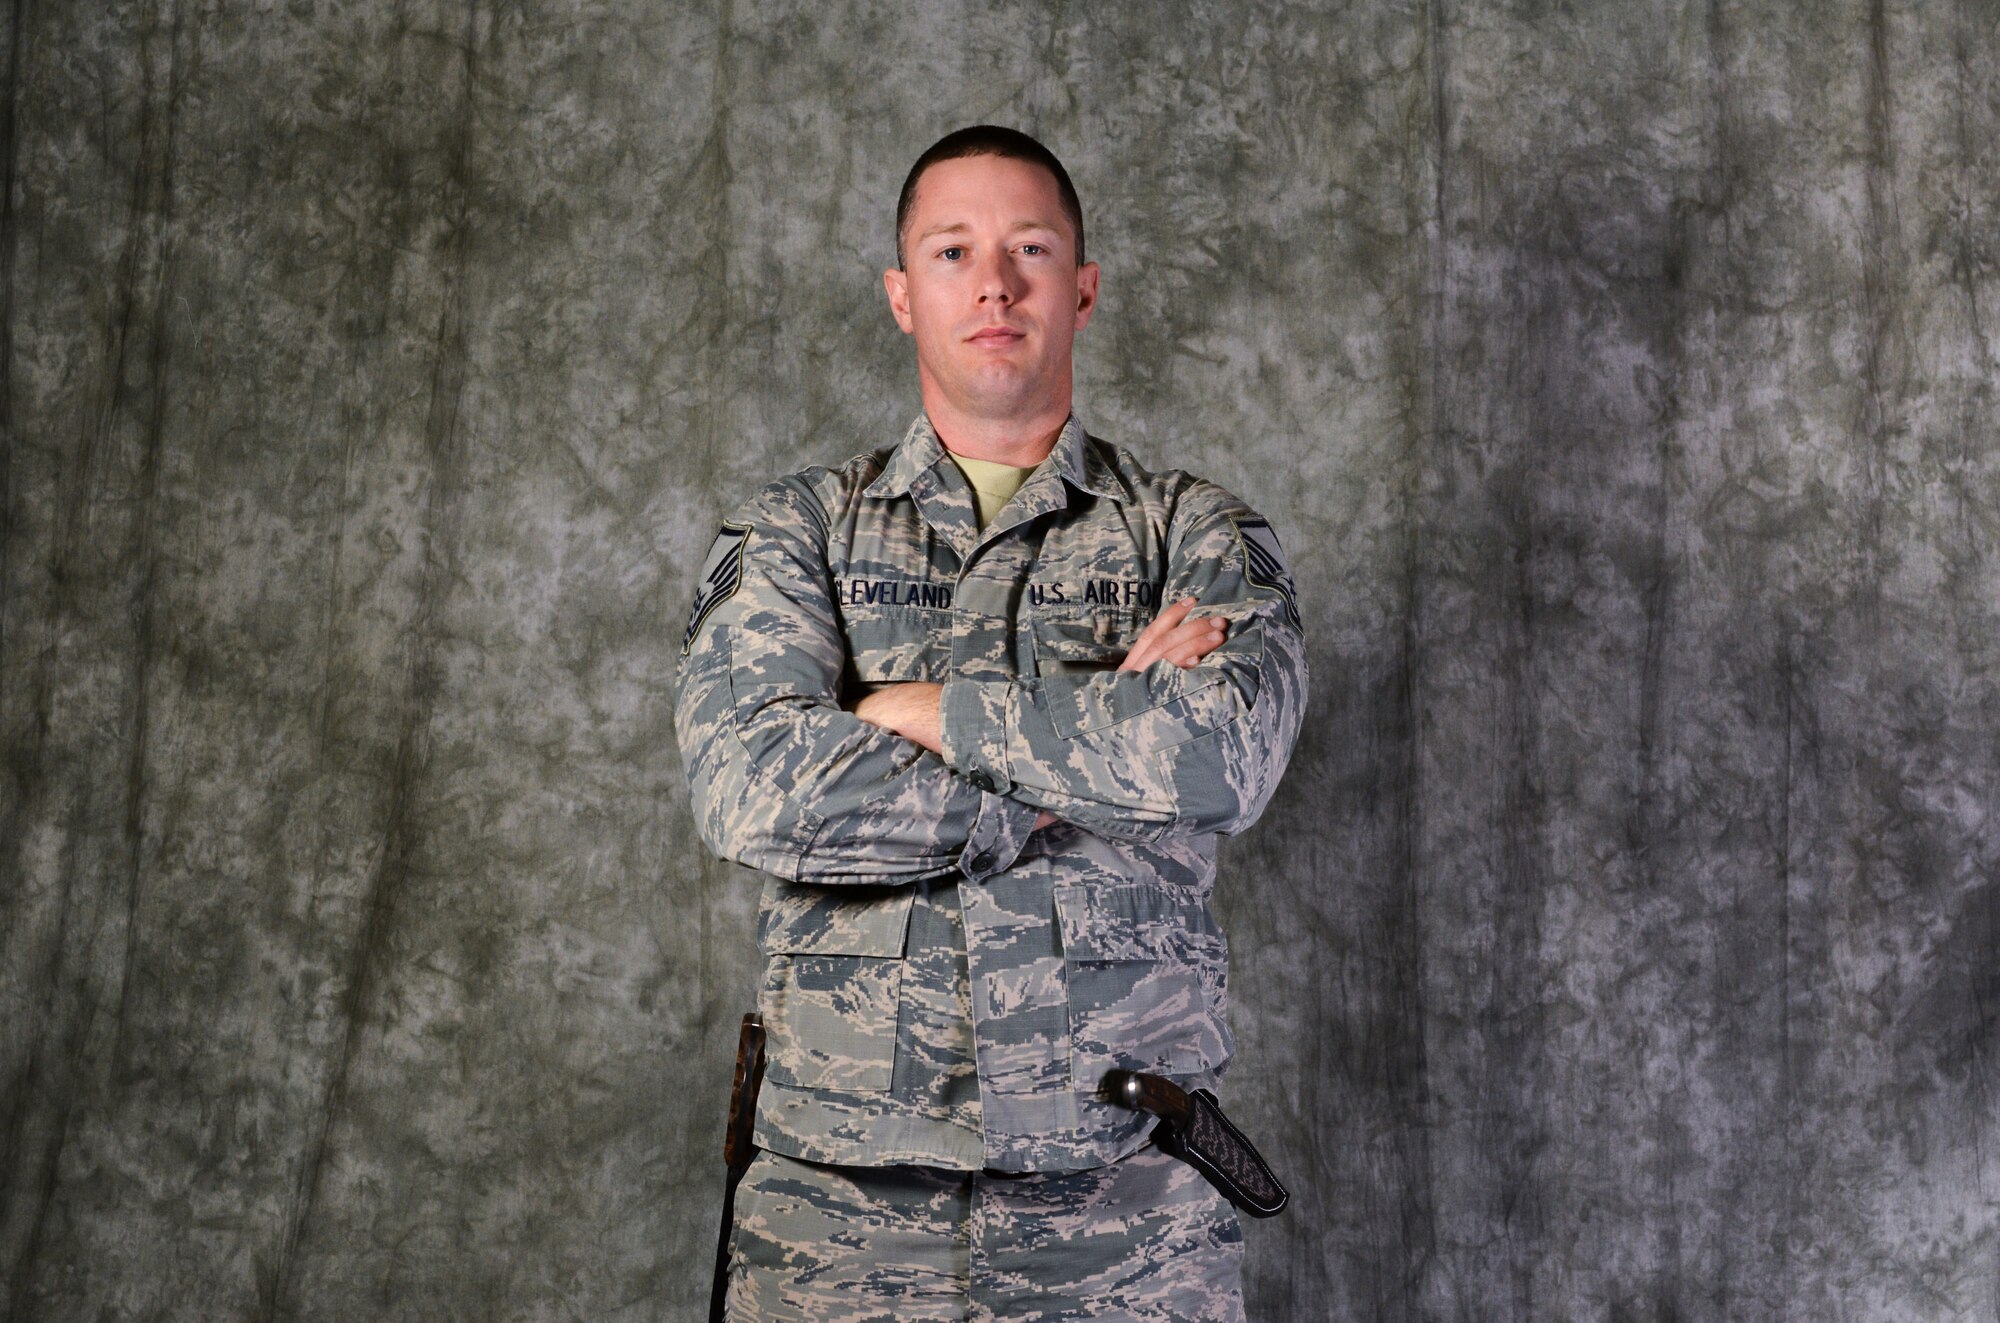 Master Sgt. Casey Cleveland, 507th Aircraft Maintenance Squadron maintenance supervisor, poses with his handmade blades Oct. 22, 2019, at Tinker Air Force Base, Oklahoma. Cleveland recently competed on the bladesmithing competition show Forged in Fire on the History Channel. (U.S. Air Force Photo by Senior Airman Mary Begy)